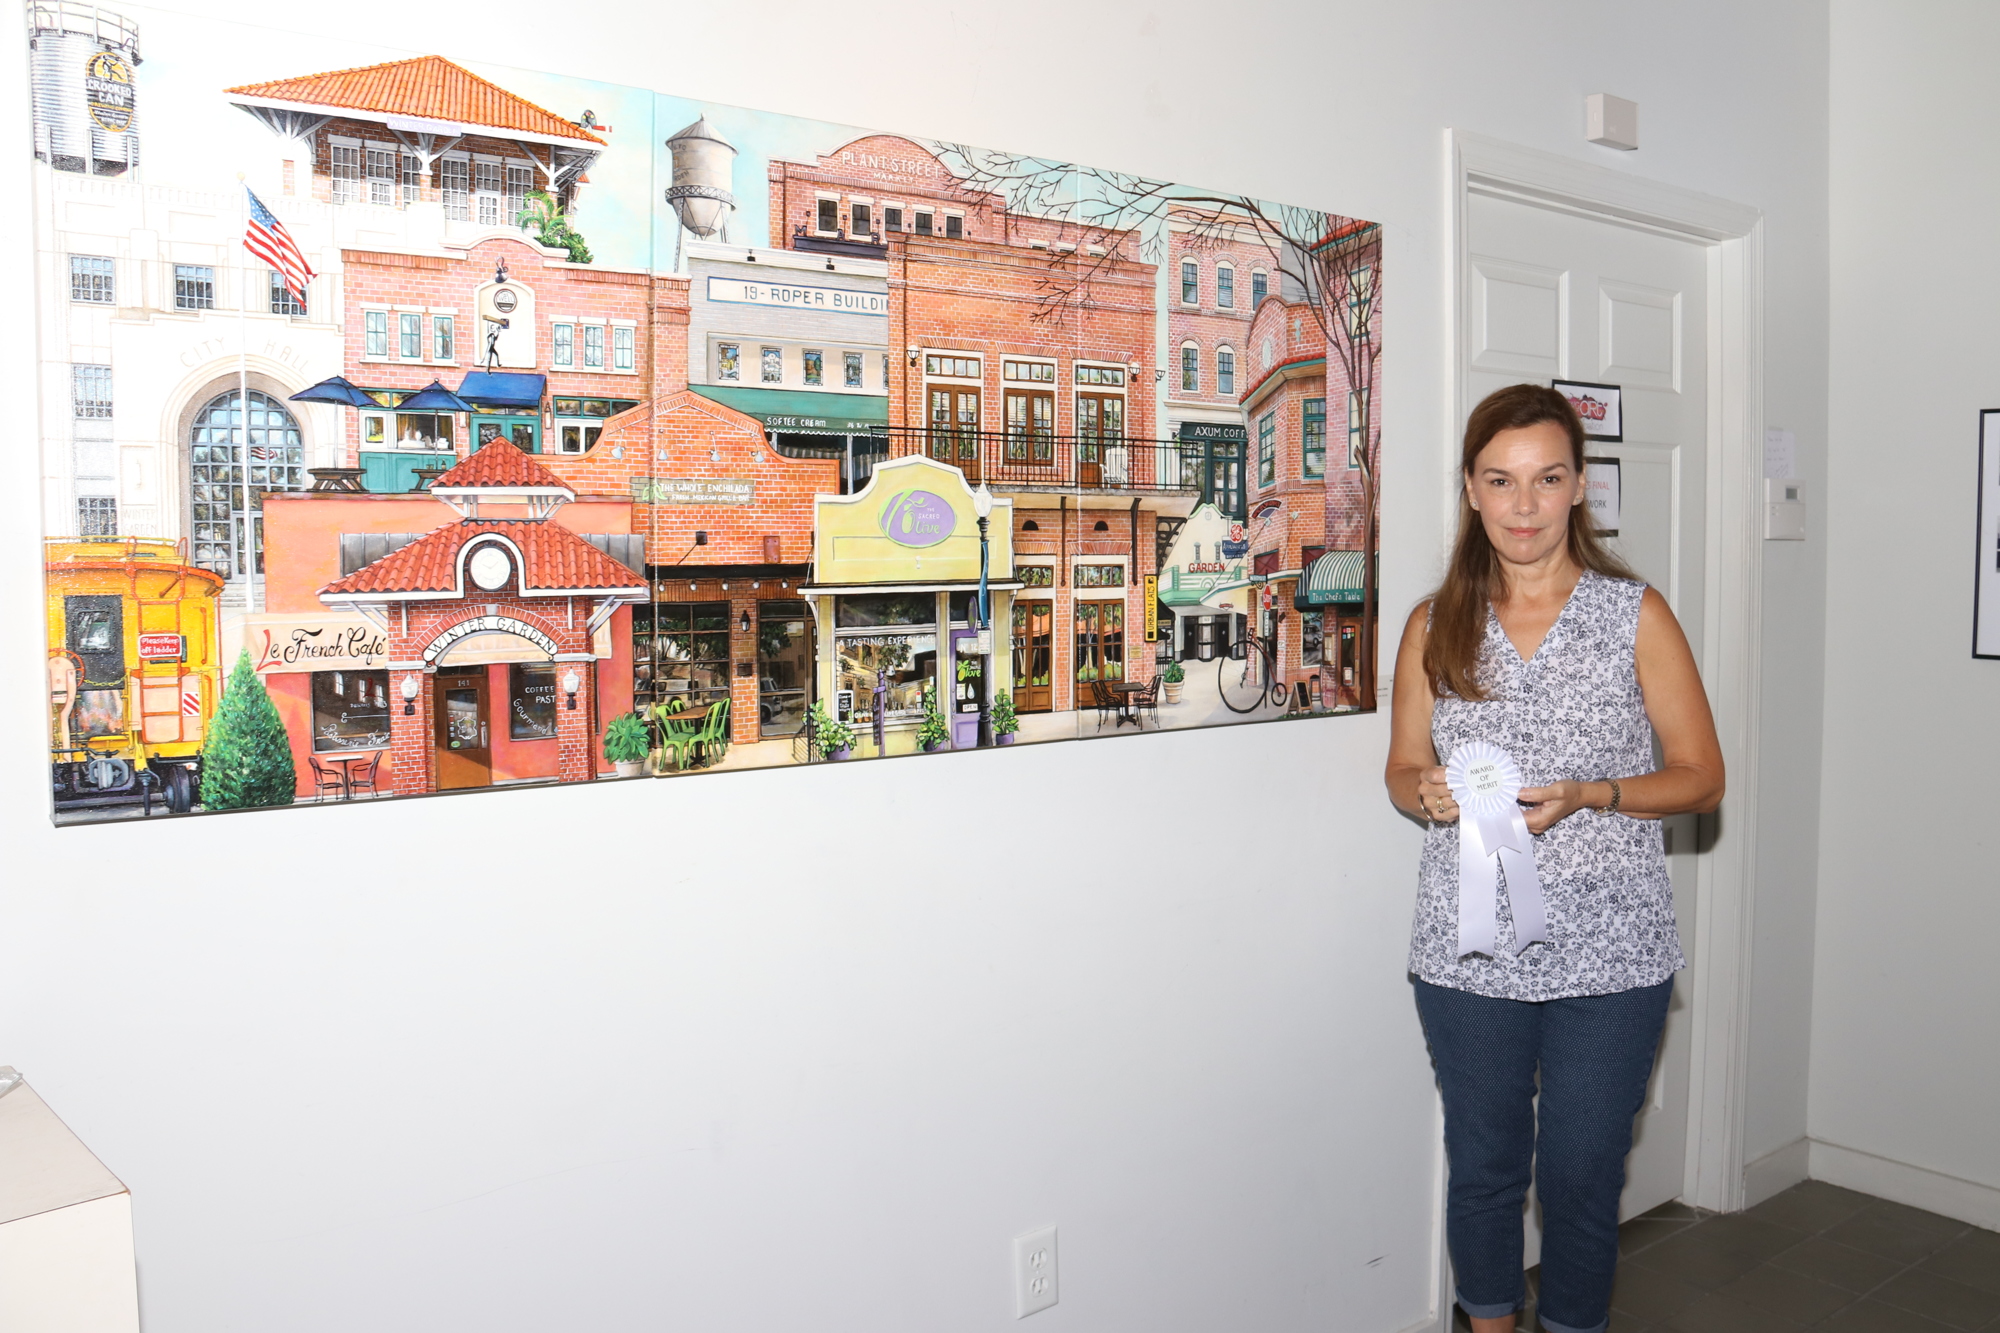  Norma Johns’s painting featured in the SoBo Gallery’s Top Choice Art Exhibition is a collage of the buildings along Plant Street that make up downtown Winter Garden.